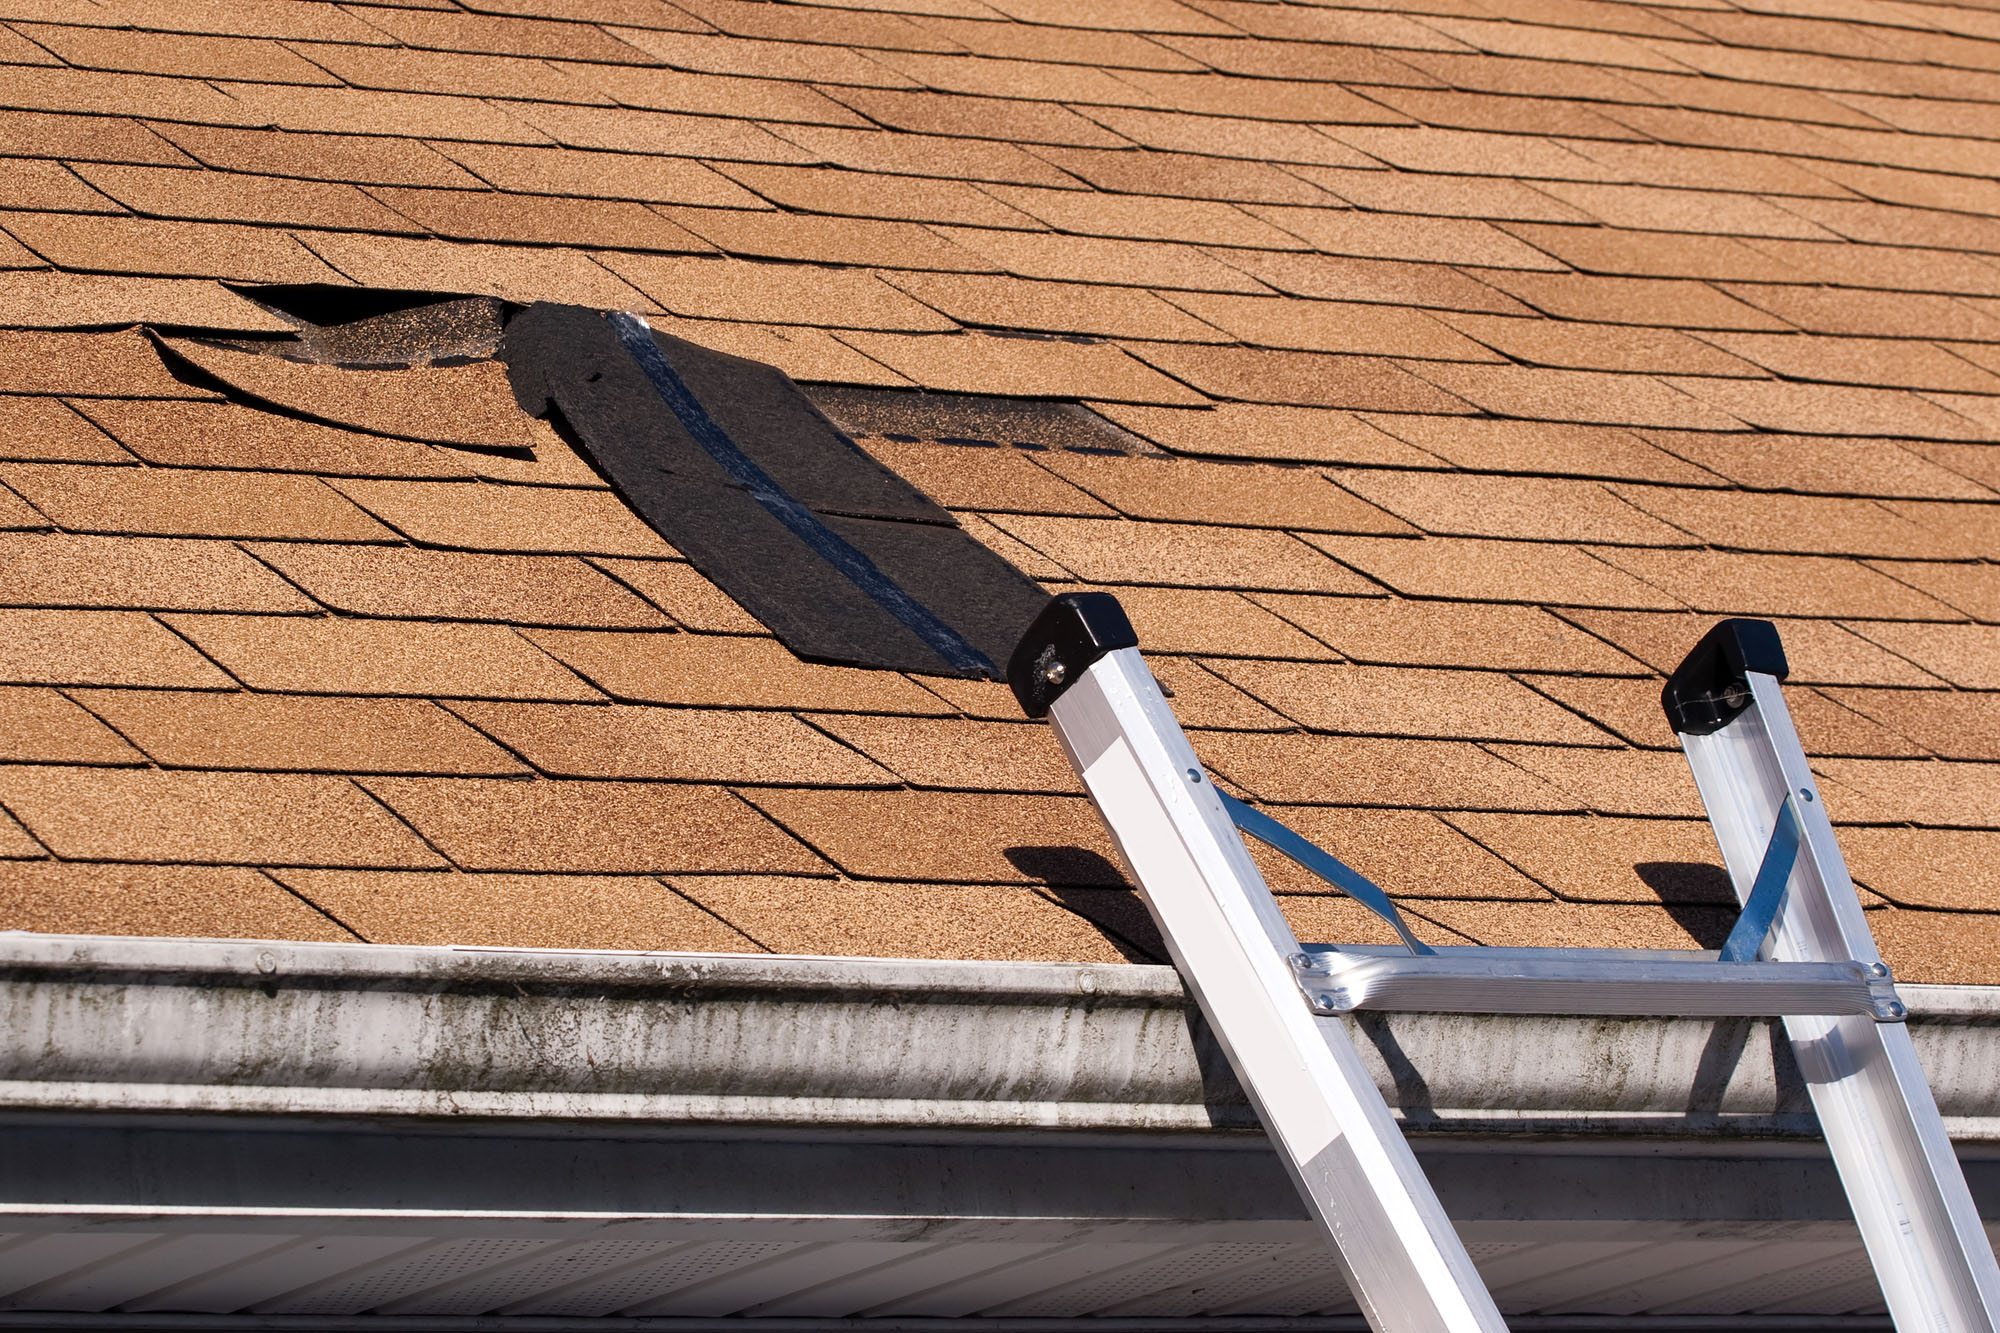 Roof Inspection and Repair Services in Palm Beach County, FL